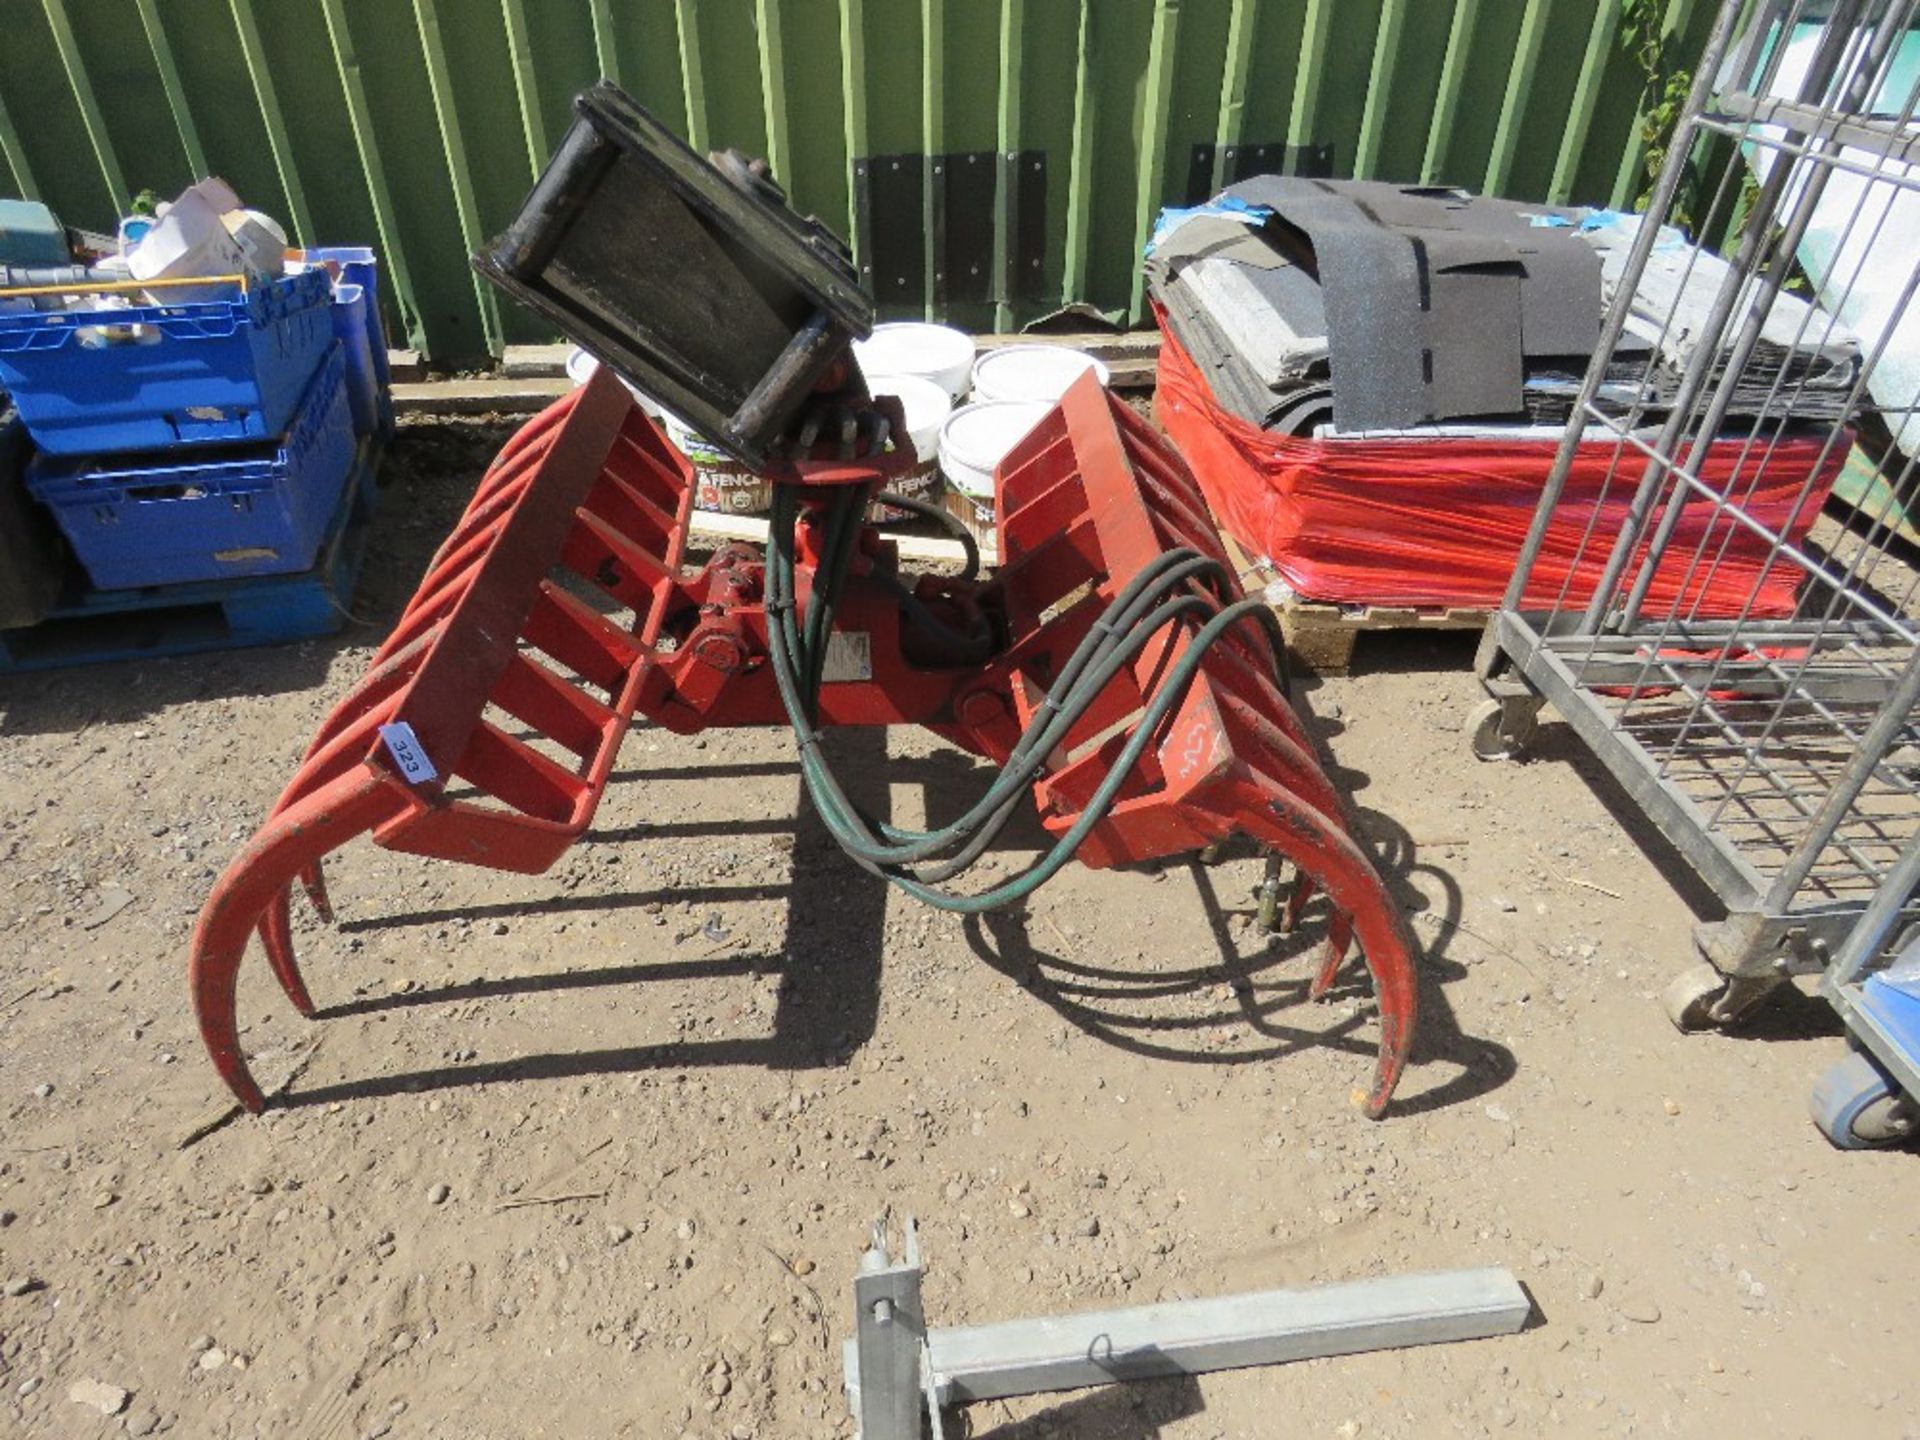 EUROMEC RAKE GRAPPLE GRAB ATTACHMENT FOR 5-8TONNE EXCAVATOR 45MM PINS, 1.2M WIDE WITH ROTATOR.